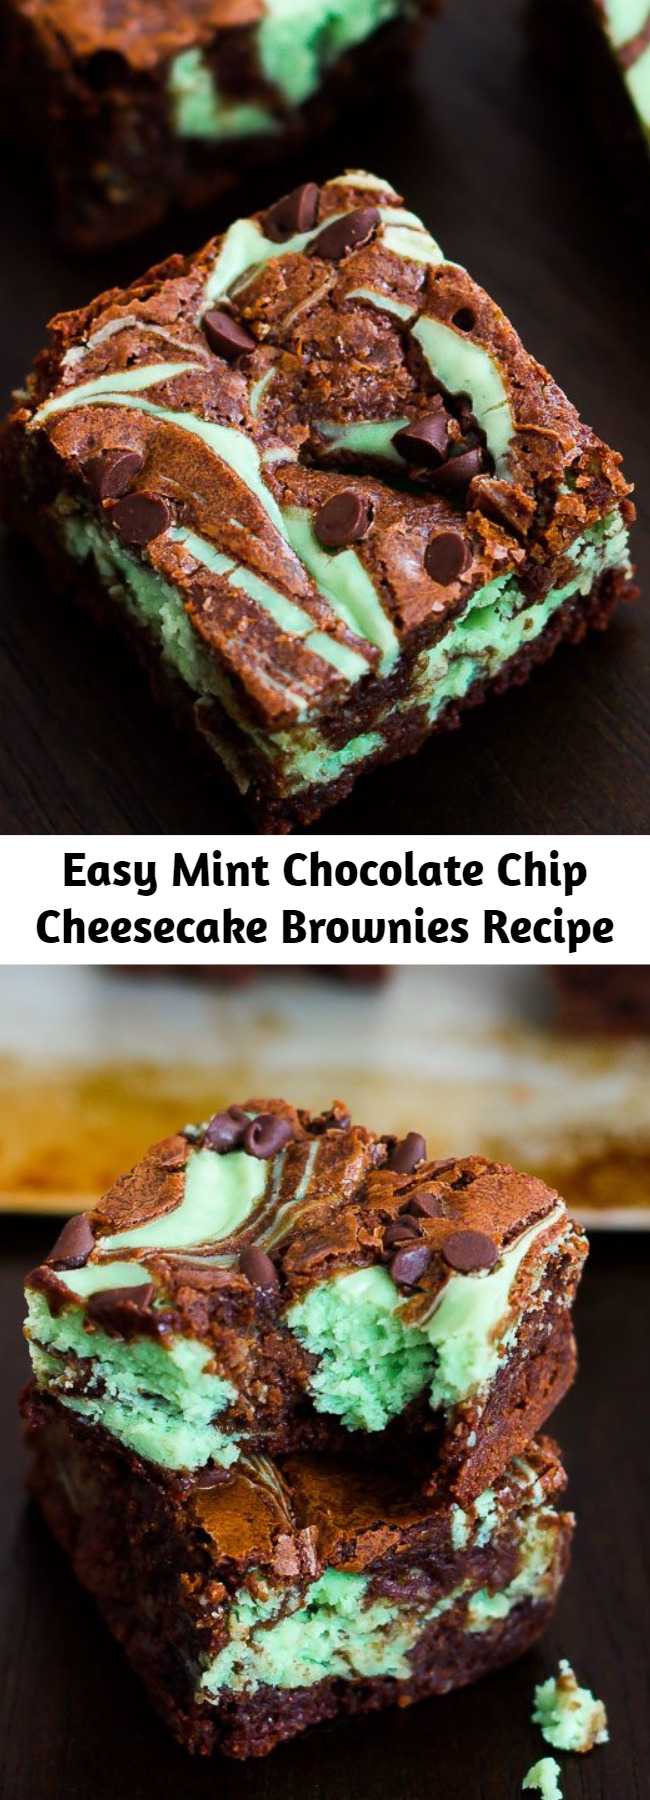 Easy Mint Chocolate Chip Cheesecake Brownies Recipe - Swirly, twirly, fudgy, minty, cheesecake goodness. I love these decadent mint chocolate brownies!